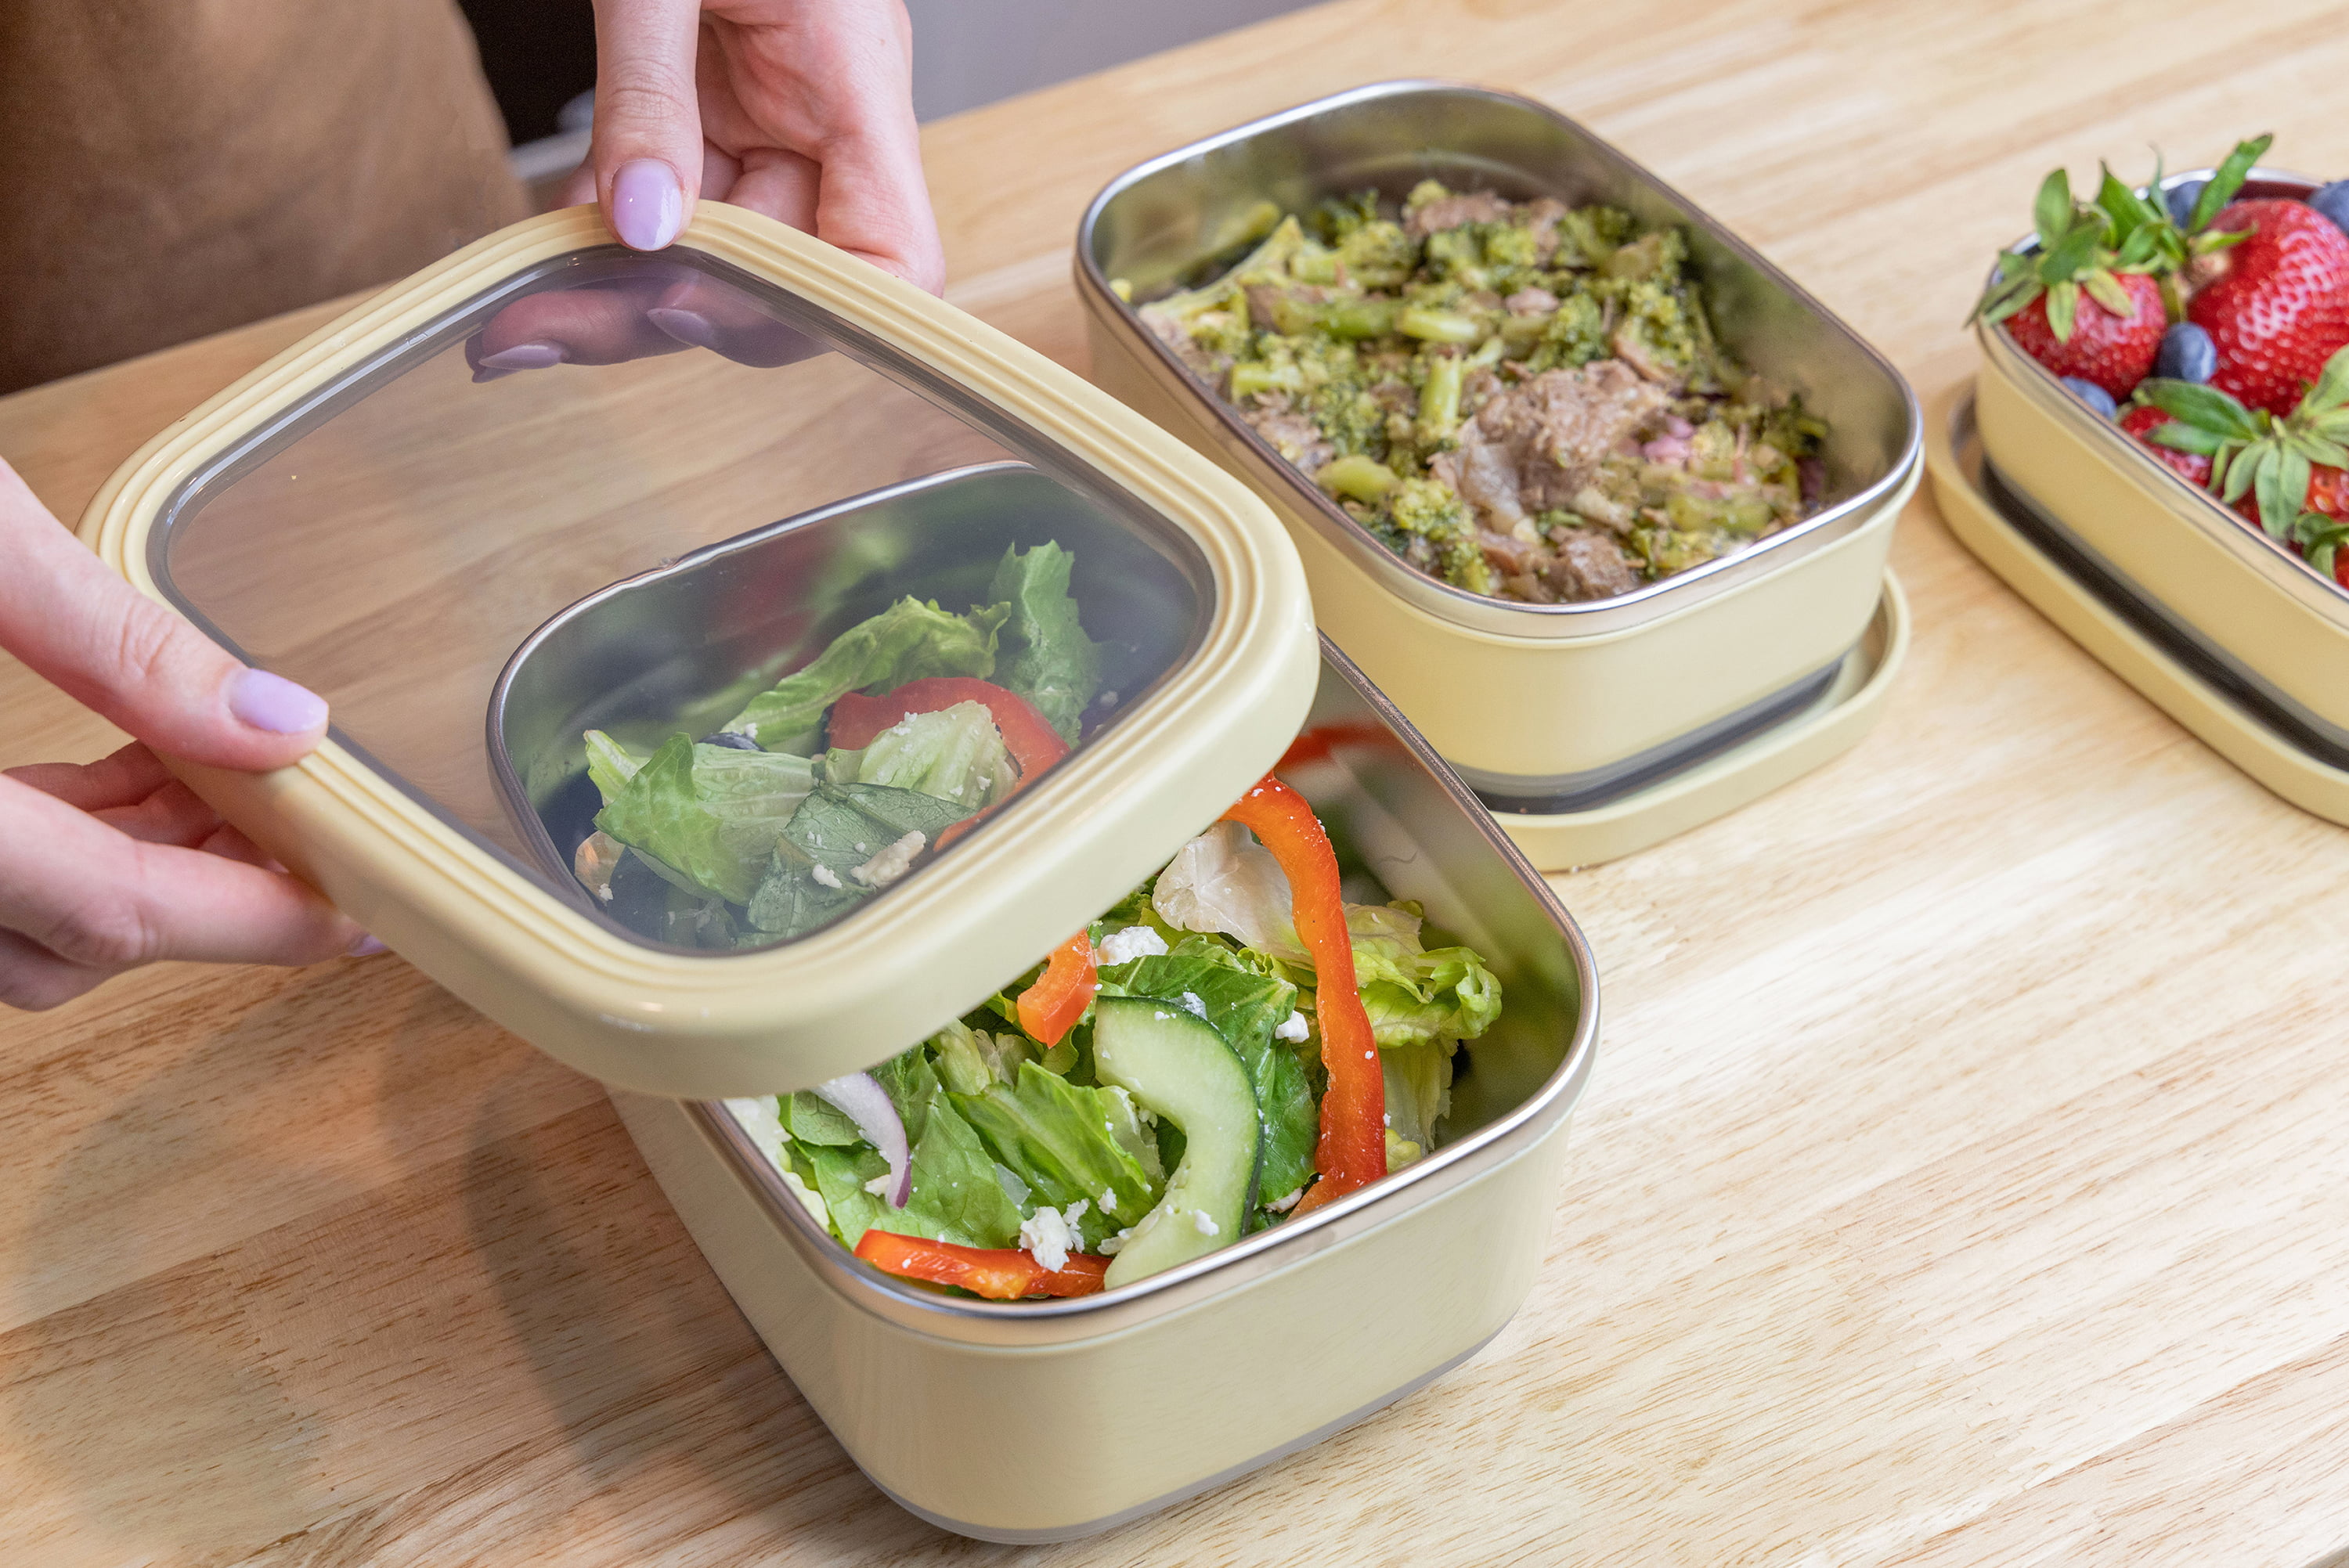 MIRA Stainless Steel Salad Bowl Lunch Container - 8 Cup Salad To Go Bowl,  Slate